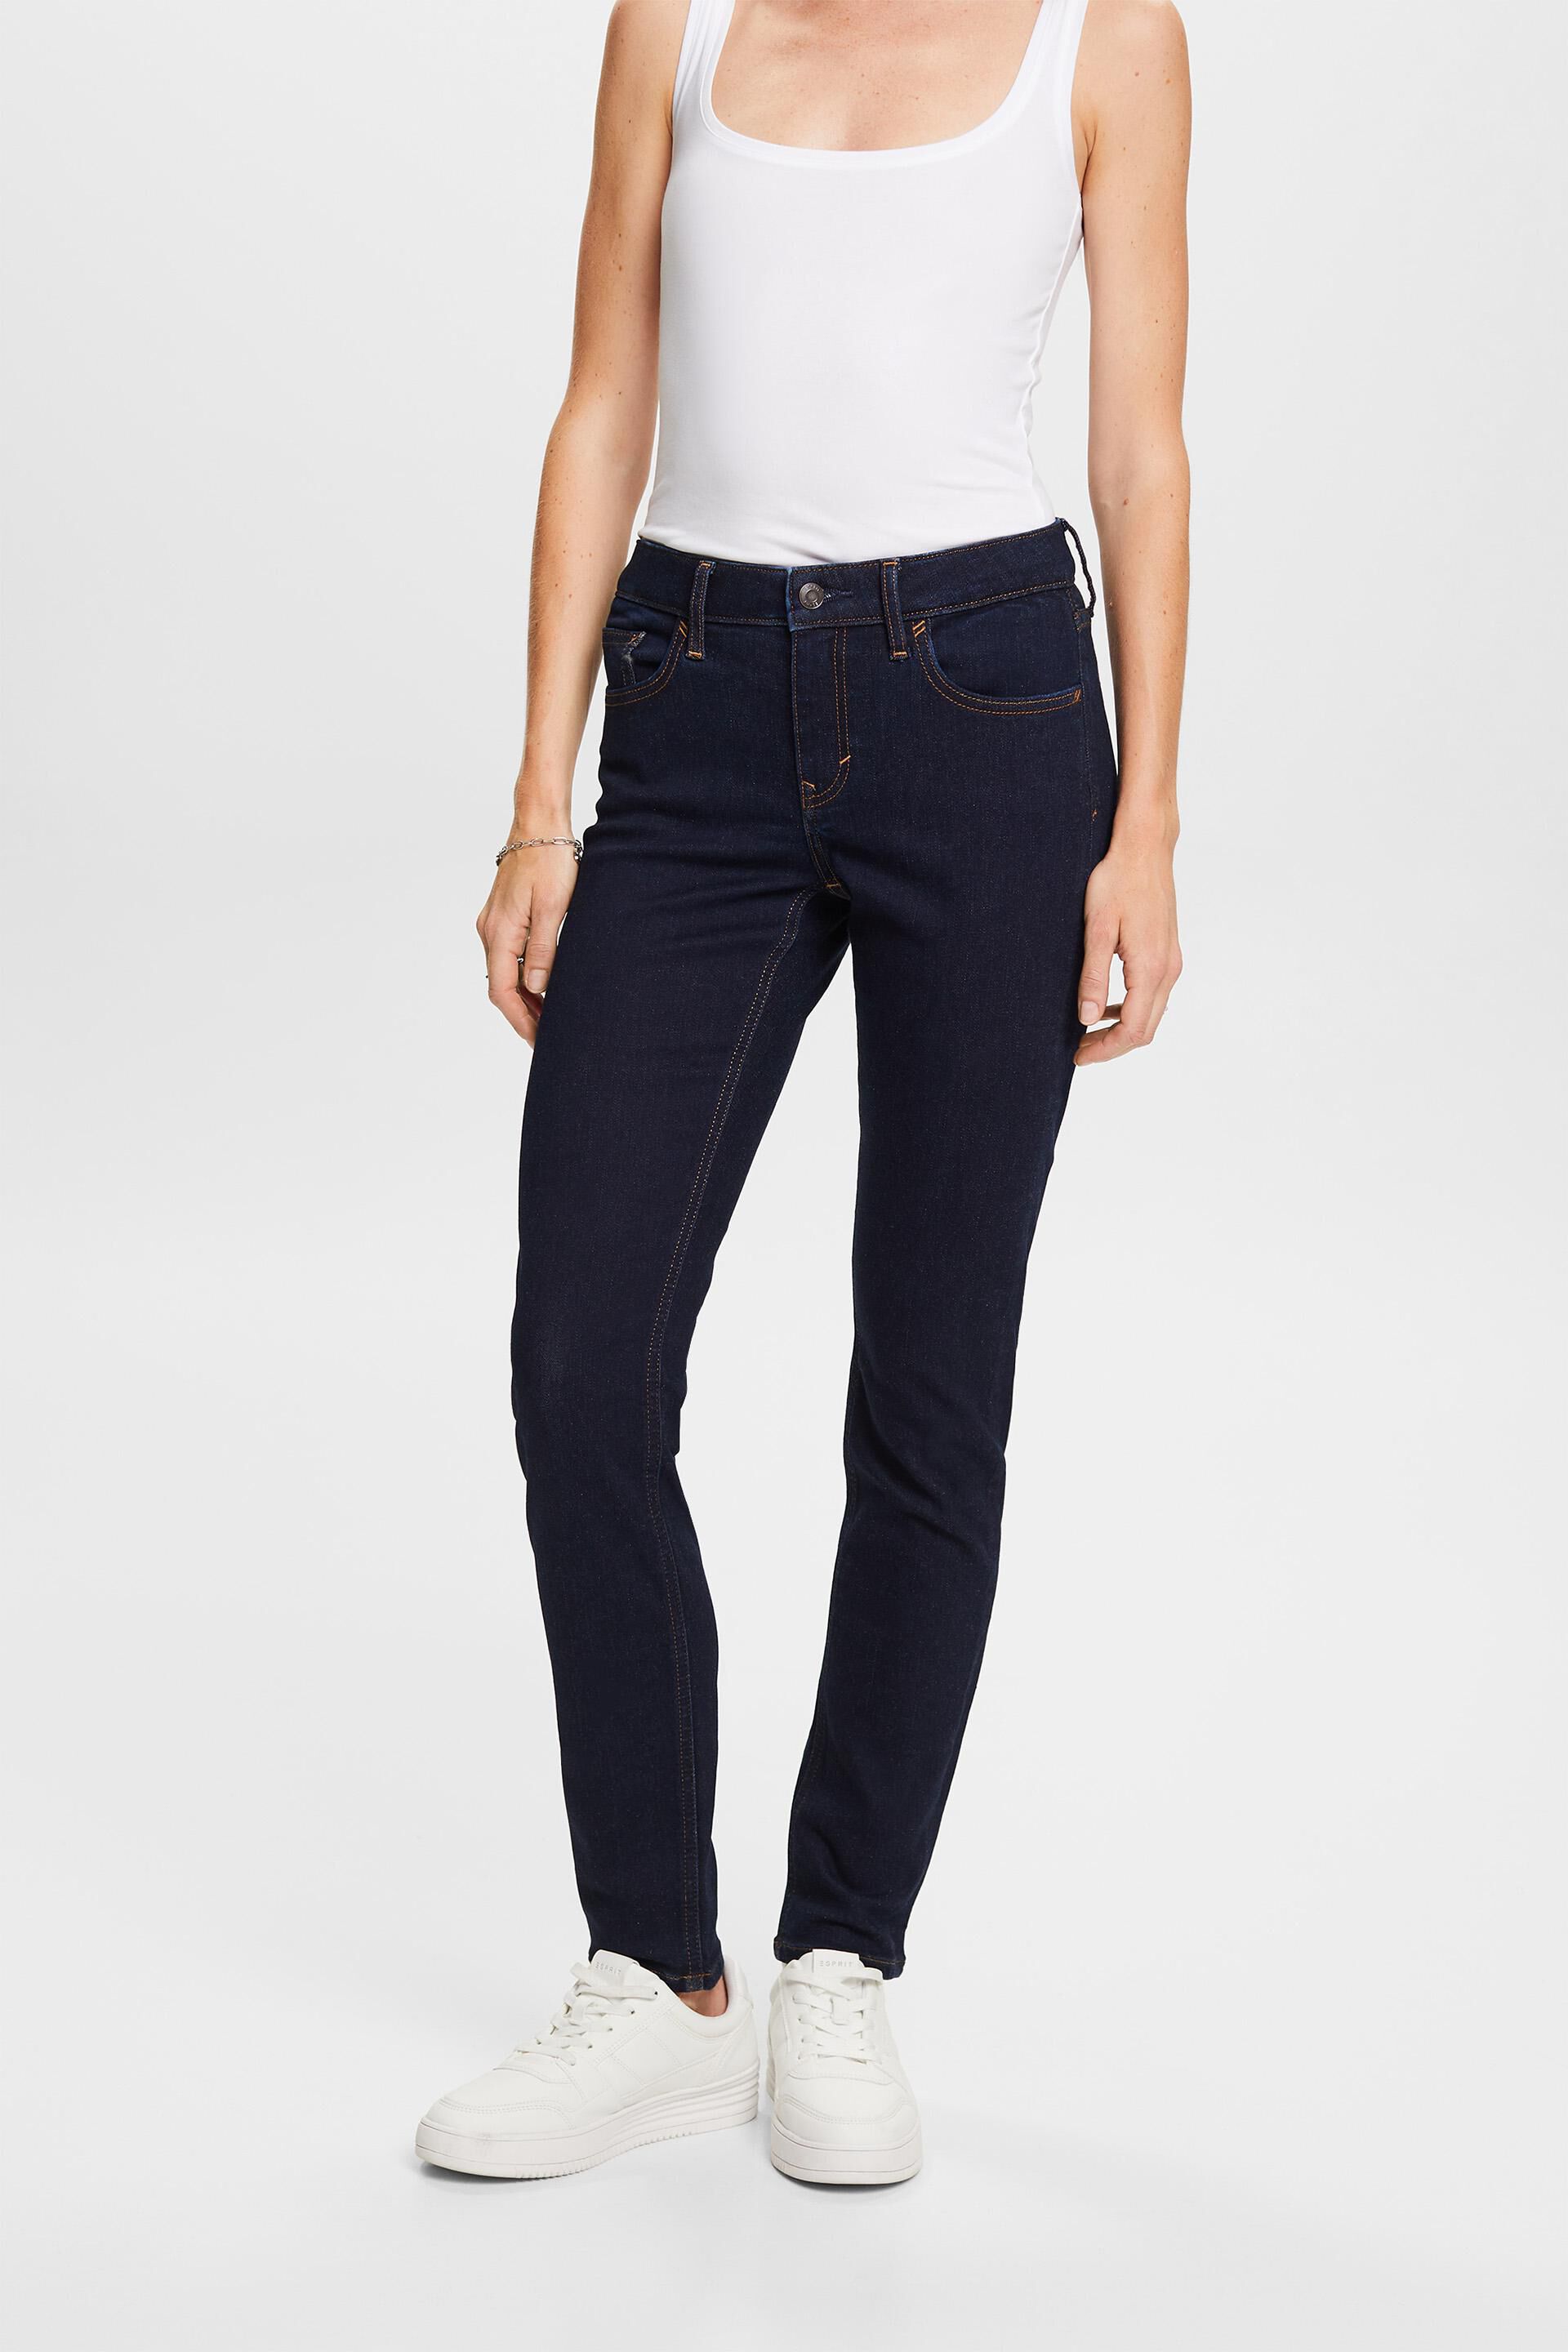 Esprit stretch mid-rise Recycled: fit slim jeans